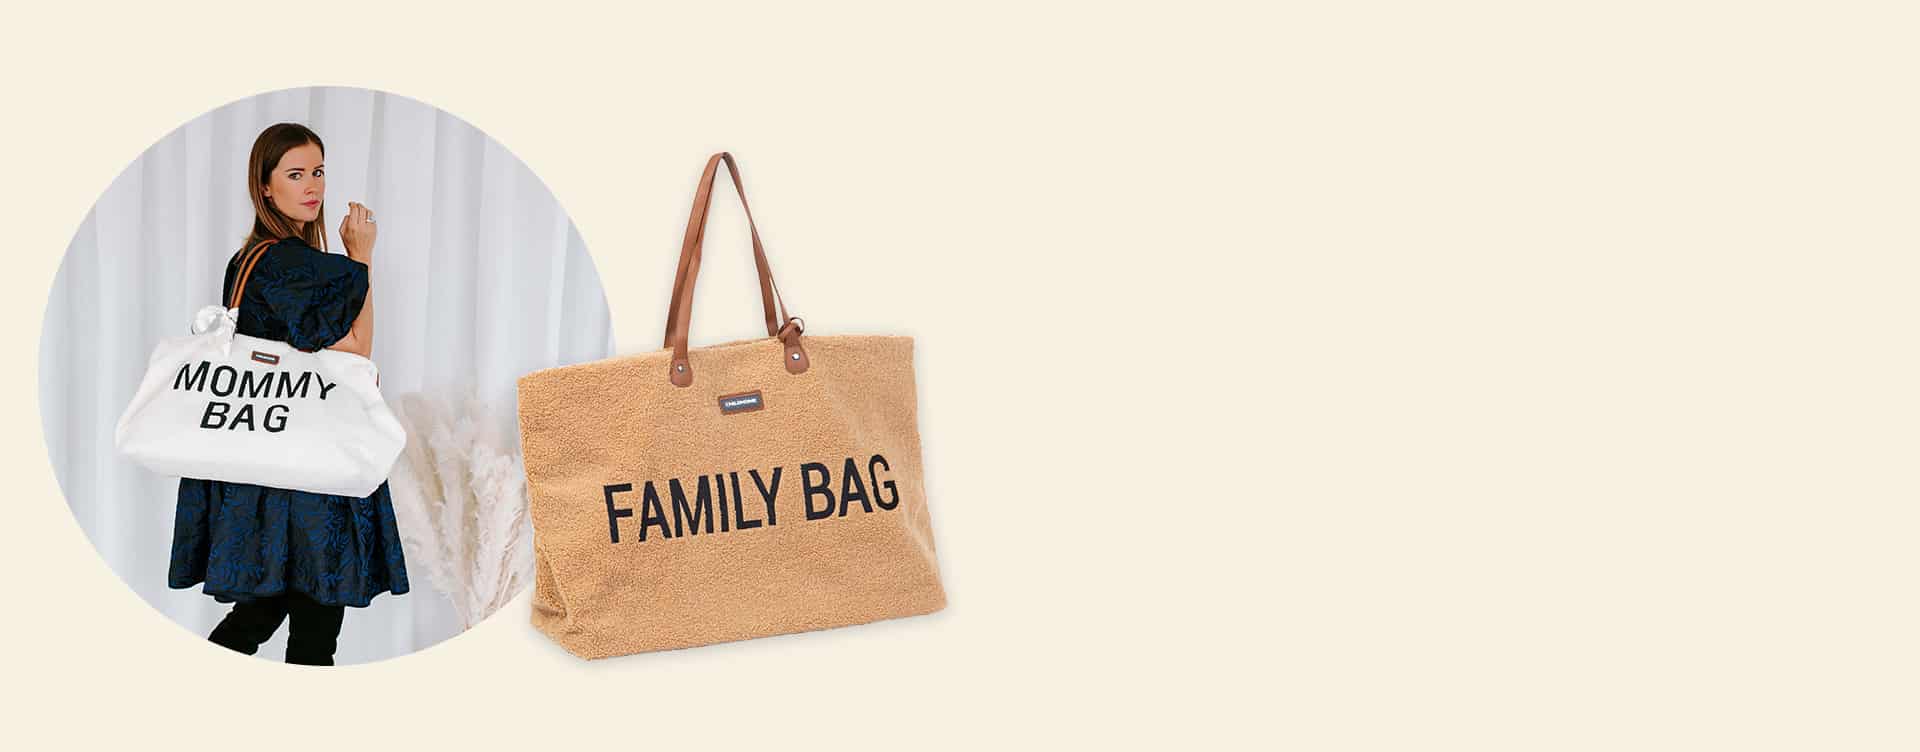 Childhome Mommy Bag and Family Bag Banner